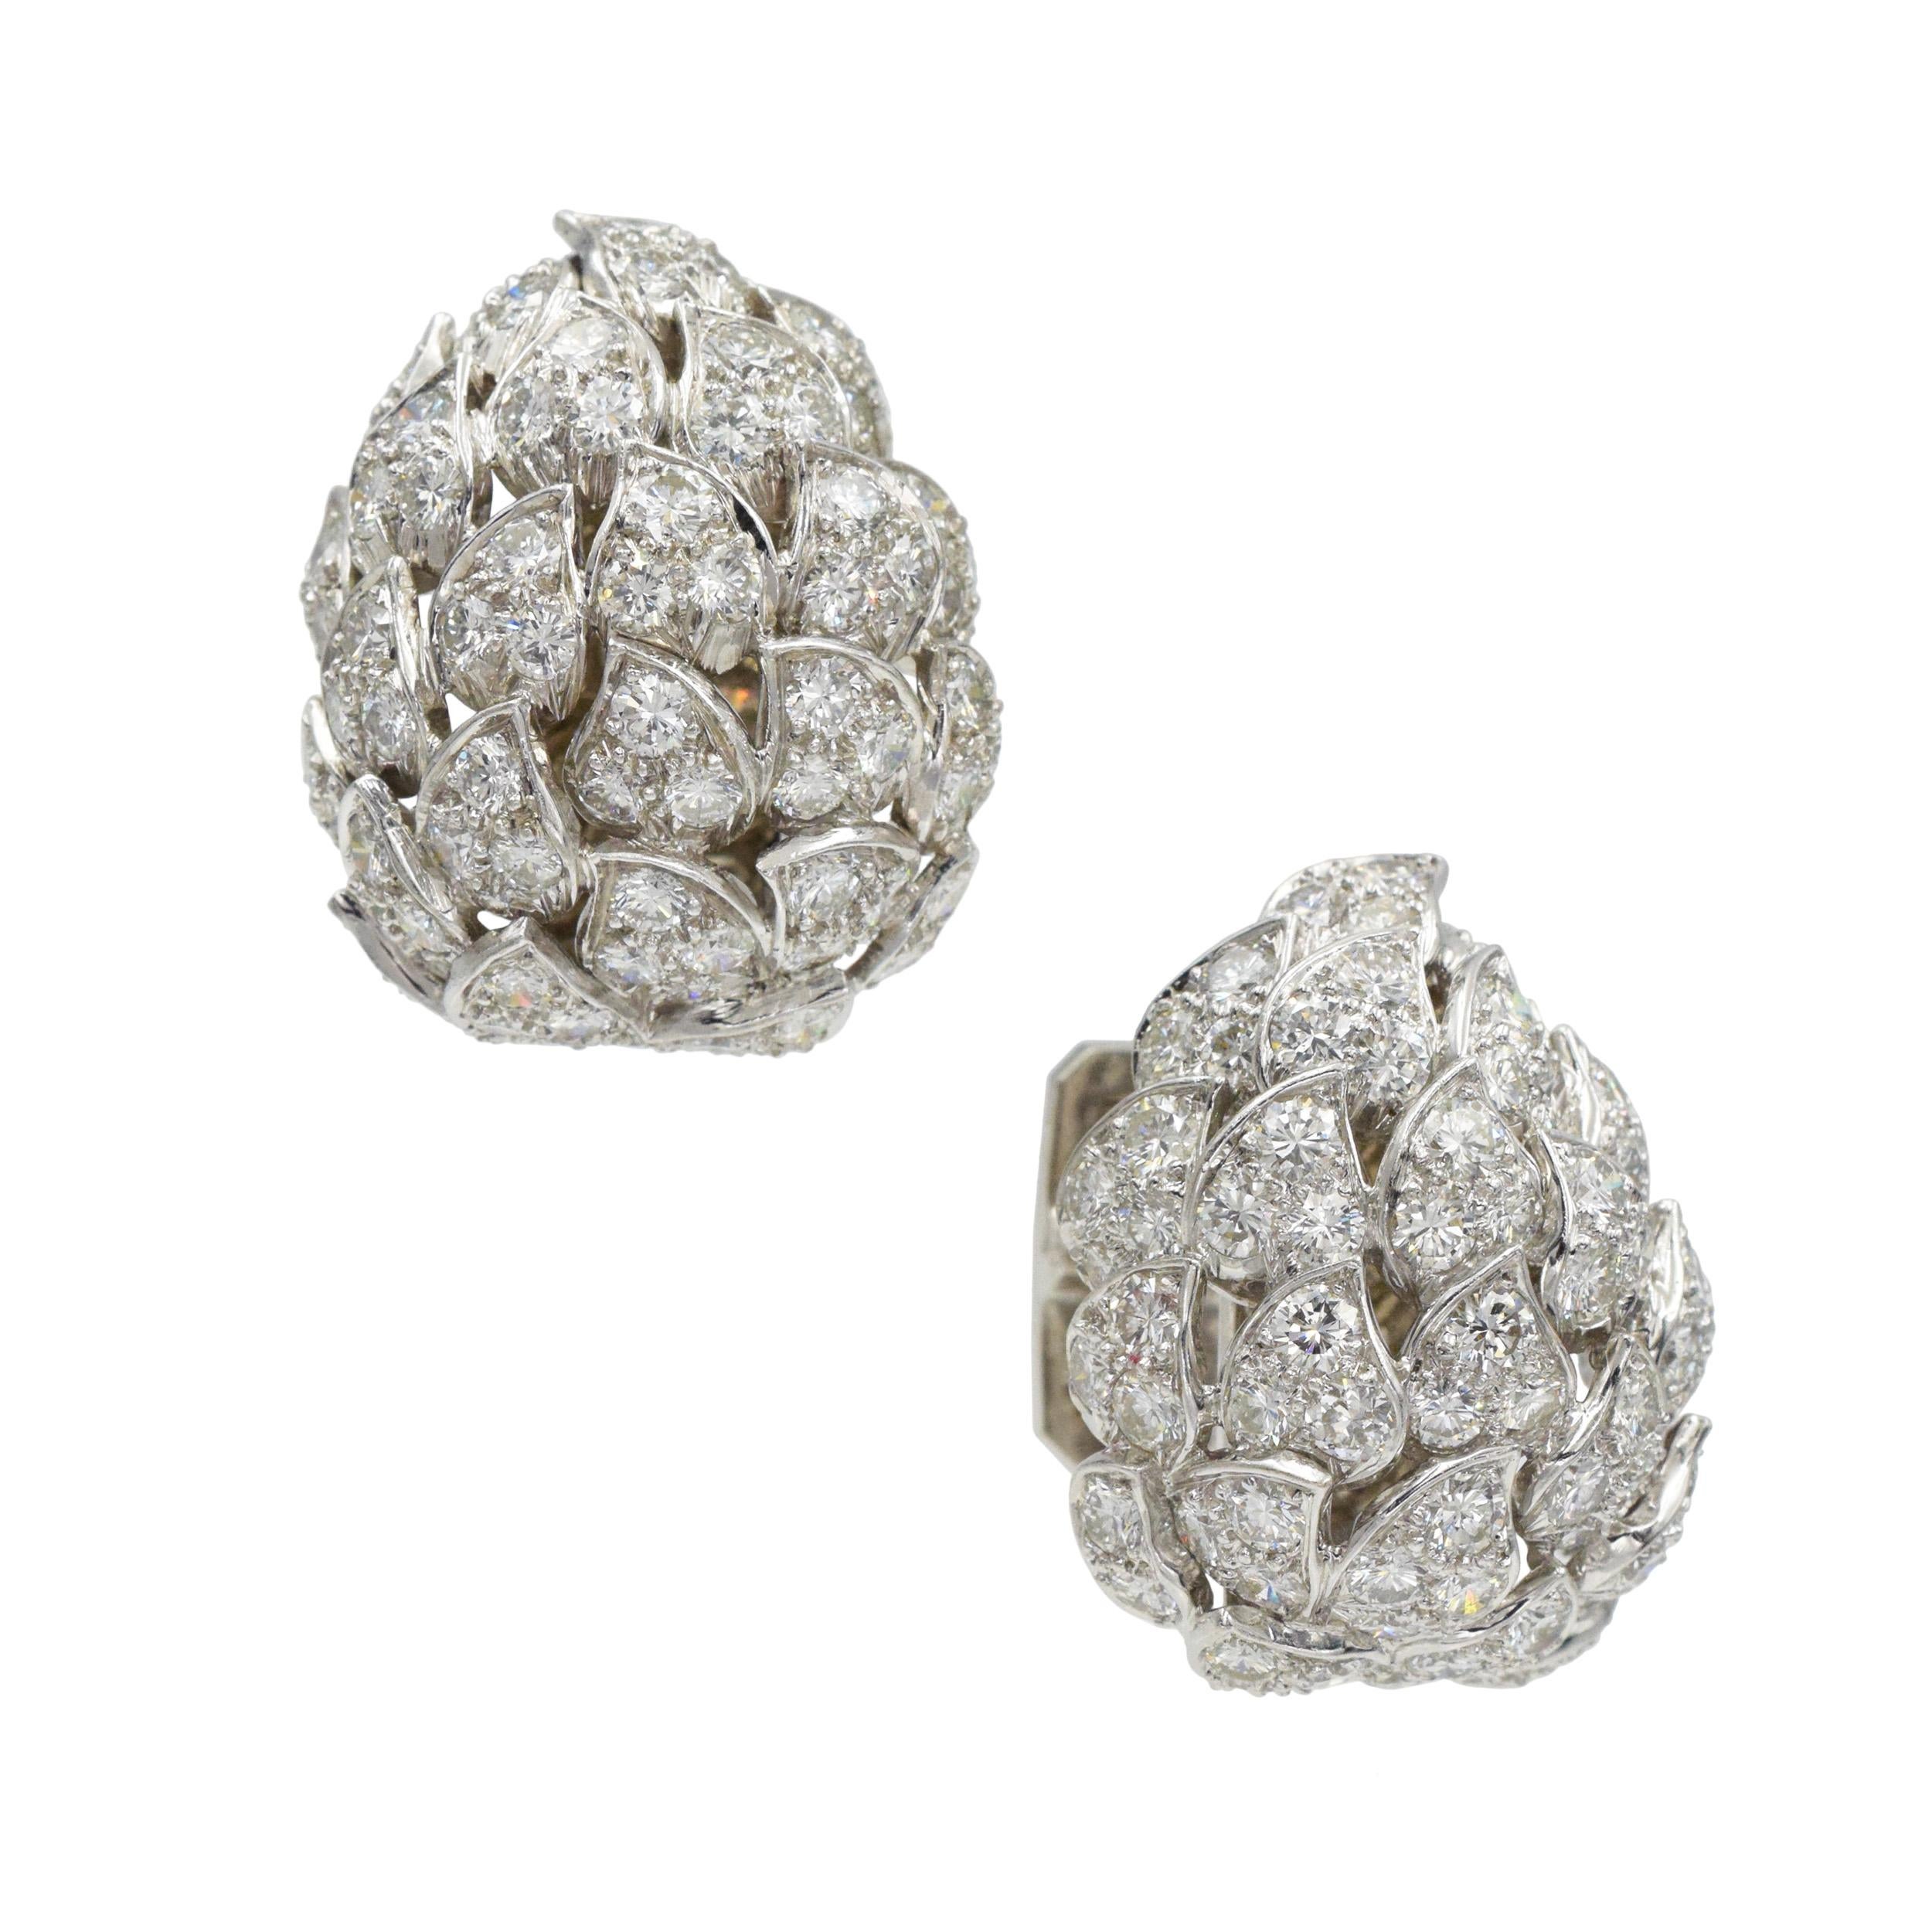 Van Cleef and Arpels Diamond Cufflinks  In Excellent Condition For Sale In New York, NY